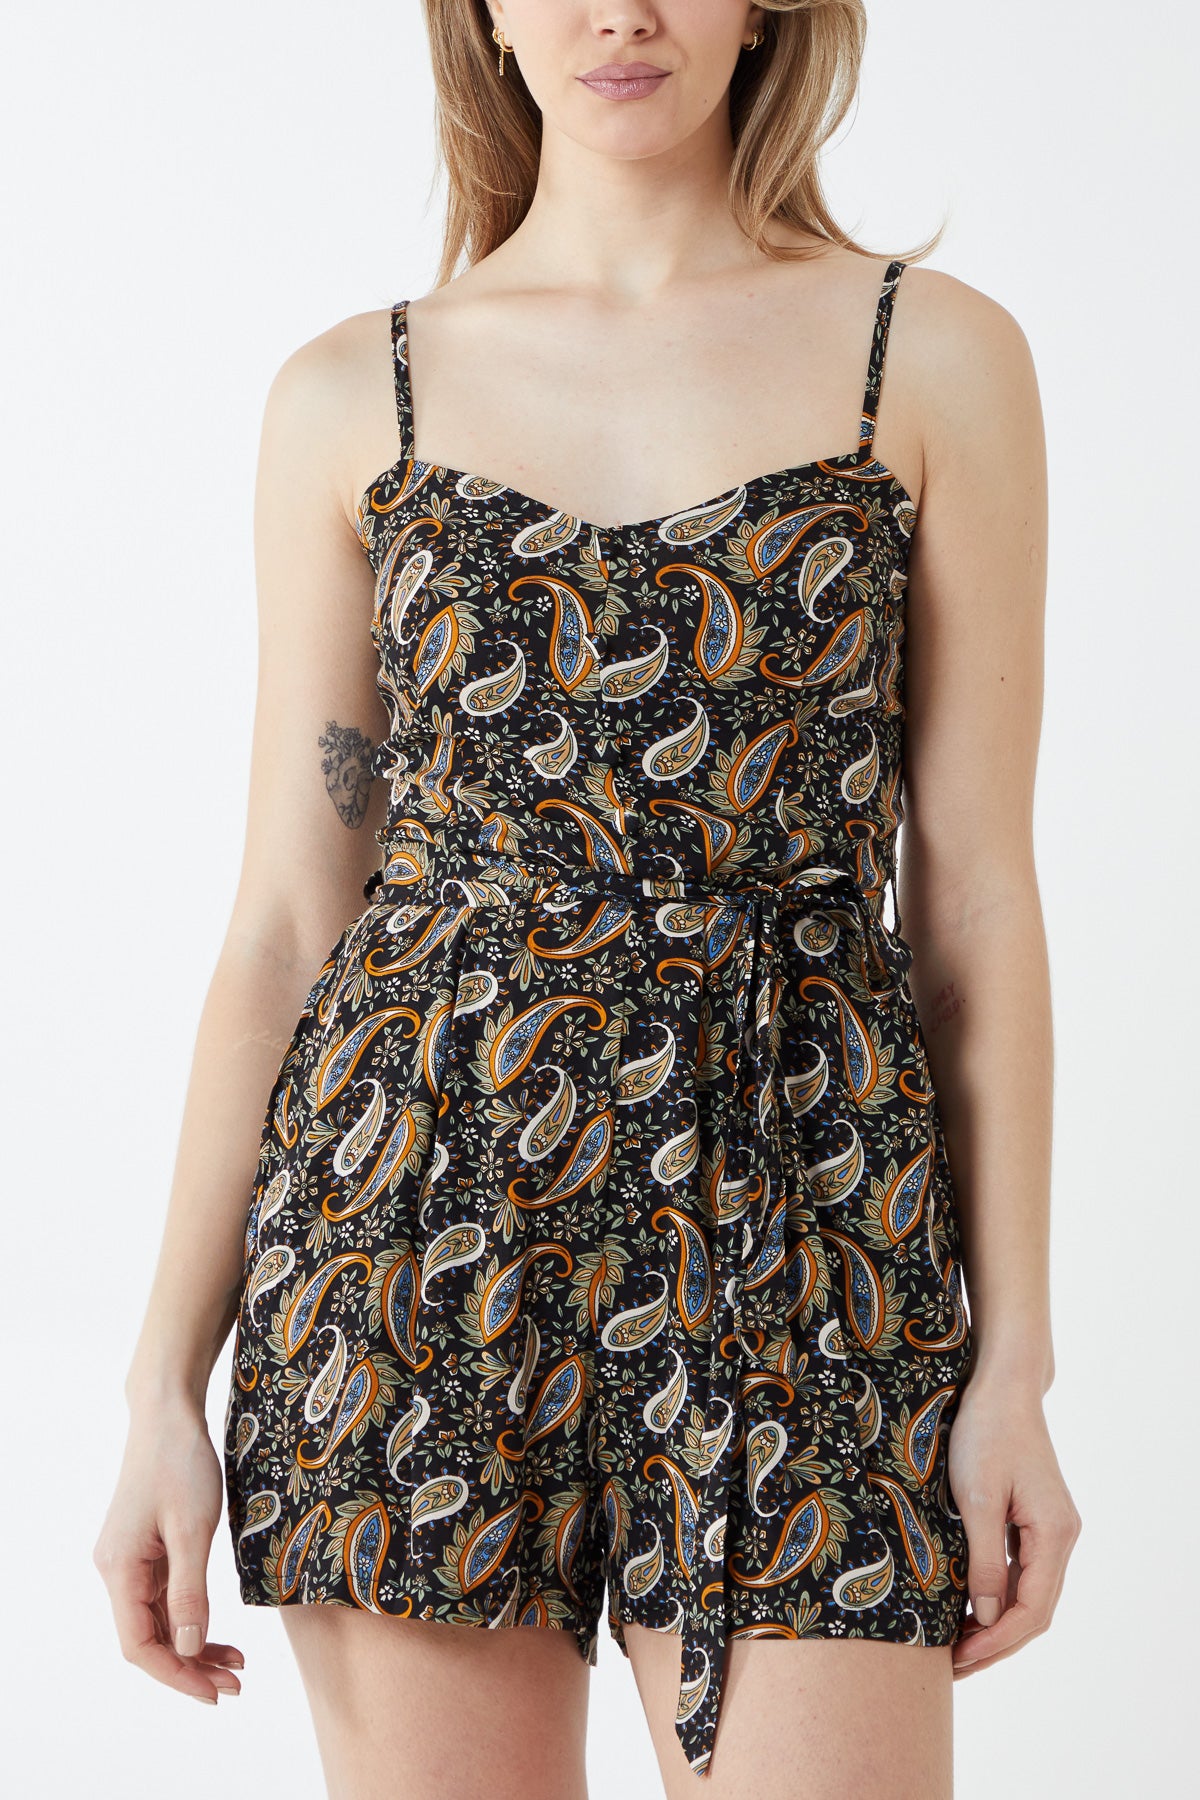 Strappy Paisley Print Playsuit